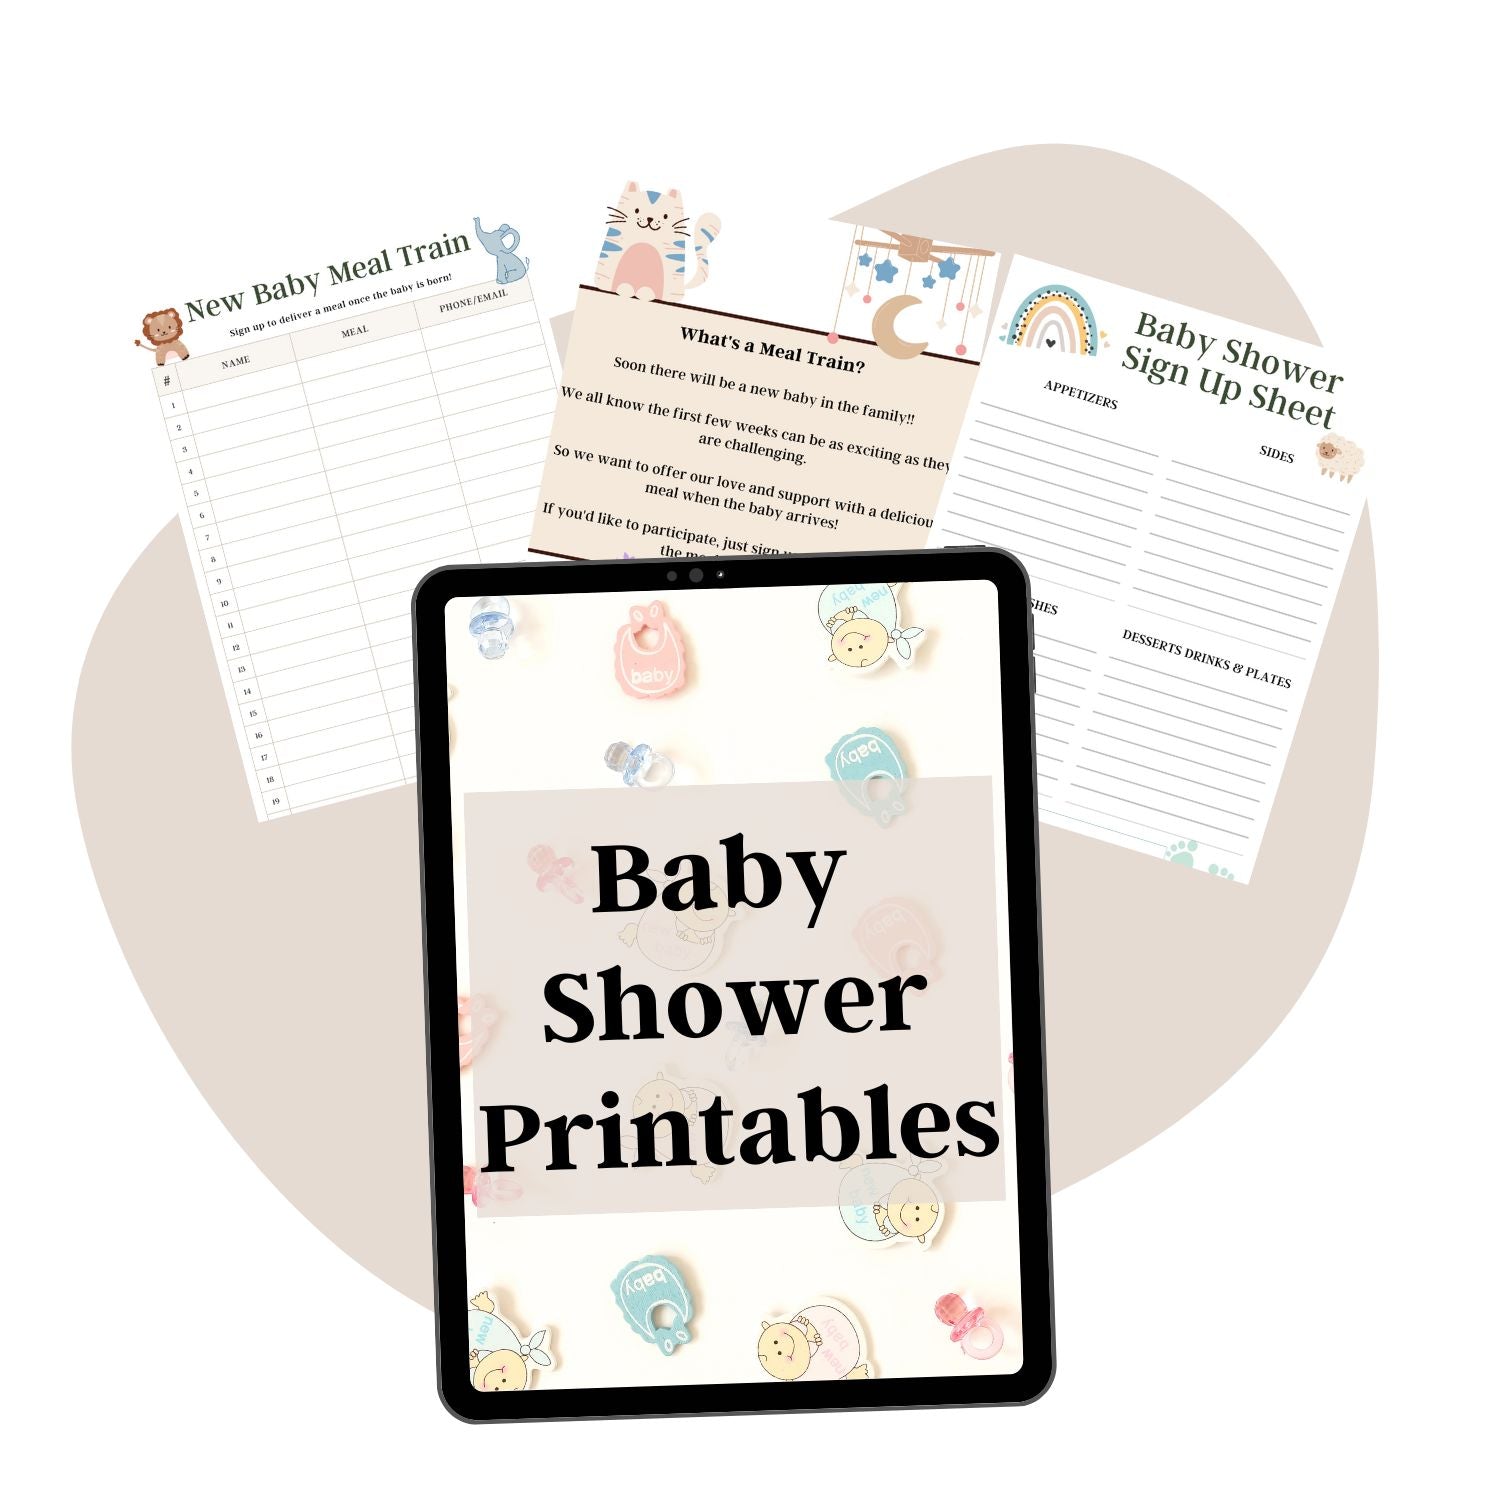 Printable Baby Shower Planner & Meal Train Sign Up Sheet – Kim and Kalee